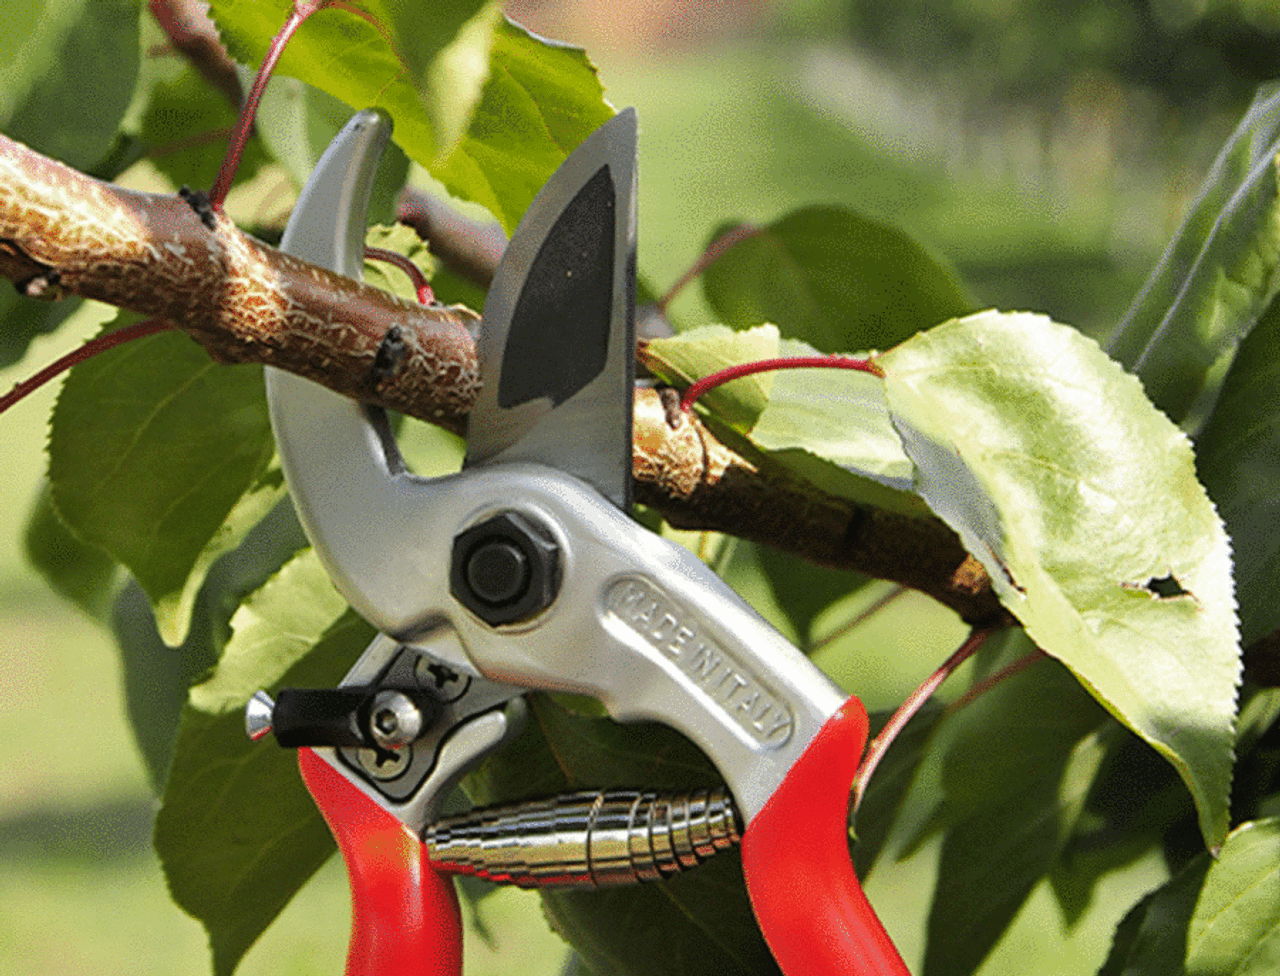 The Castellari UNIVERSAL pruner can be used by left handed and right handed users